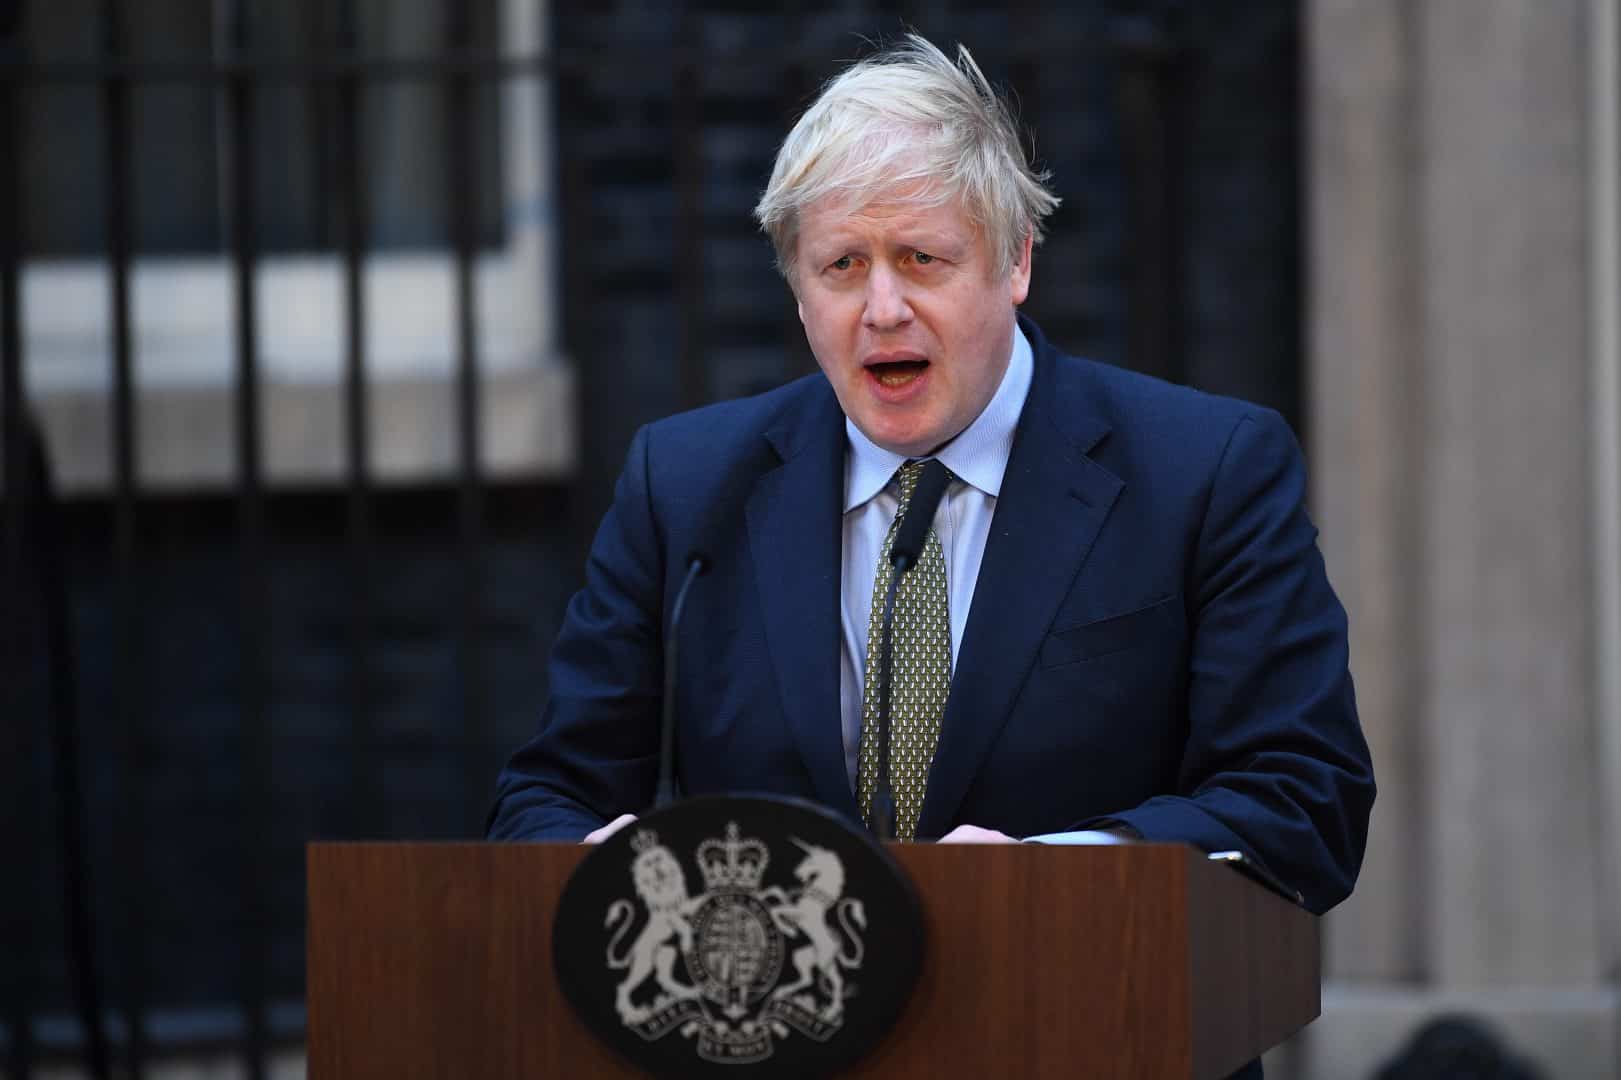 Johnson may now ditch Brexit protection for workers’ rights and environment he promised